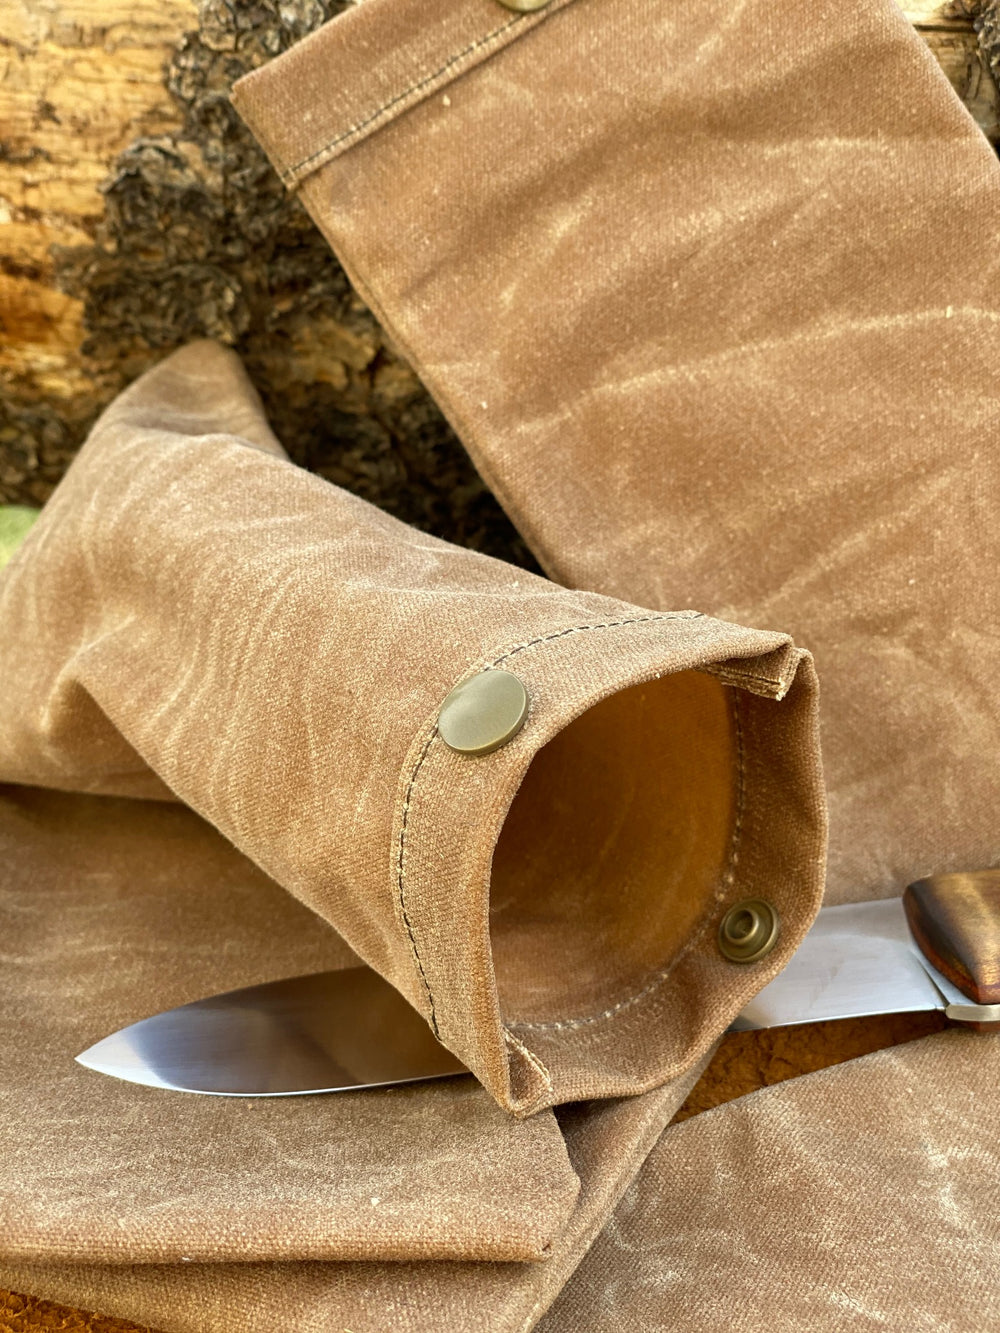 Set of Two Small Handmade Waxed Canvas Ditty Bags for Bushcraft Camping Outdoors (Various Colors) - Colorado Bushcraft